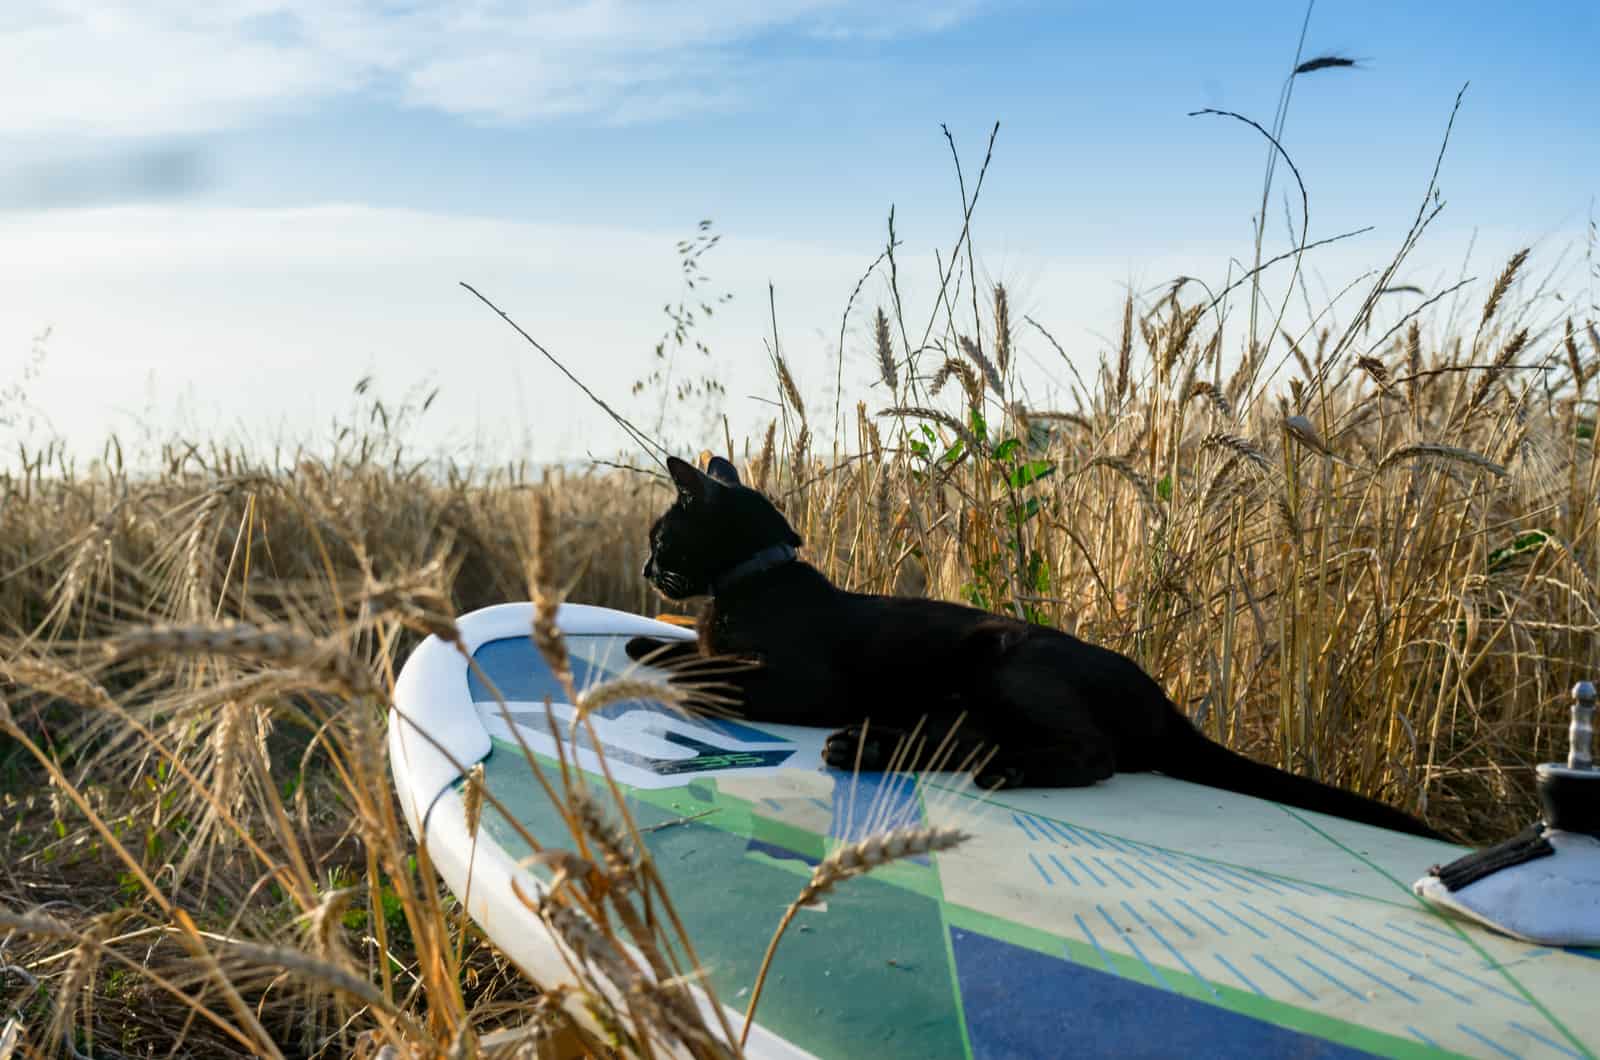 Black cat on a surfboard in a wheat field at sunset